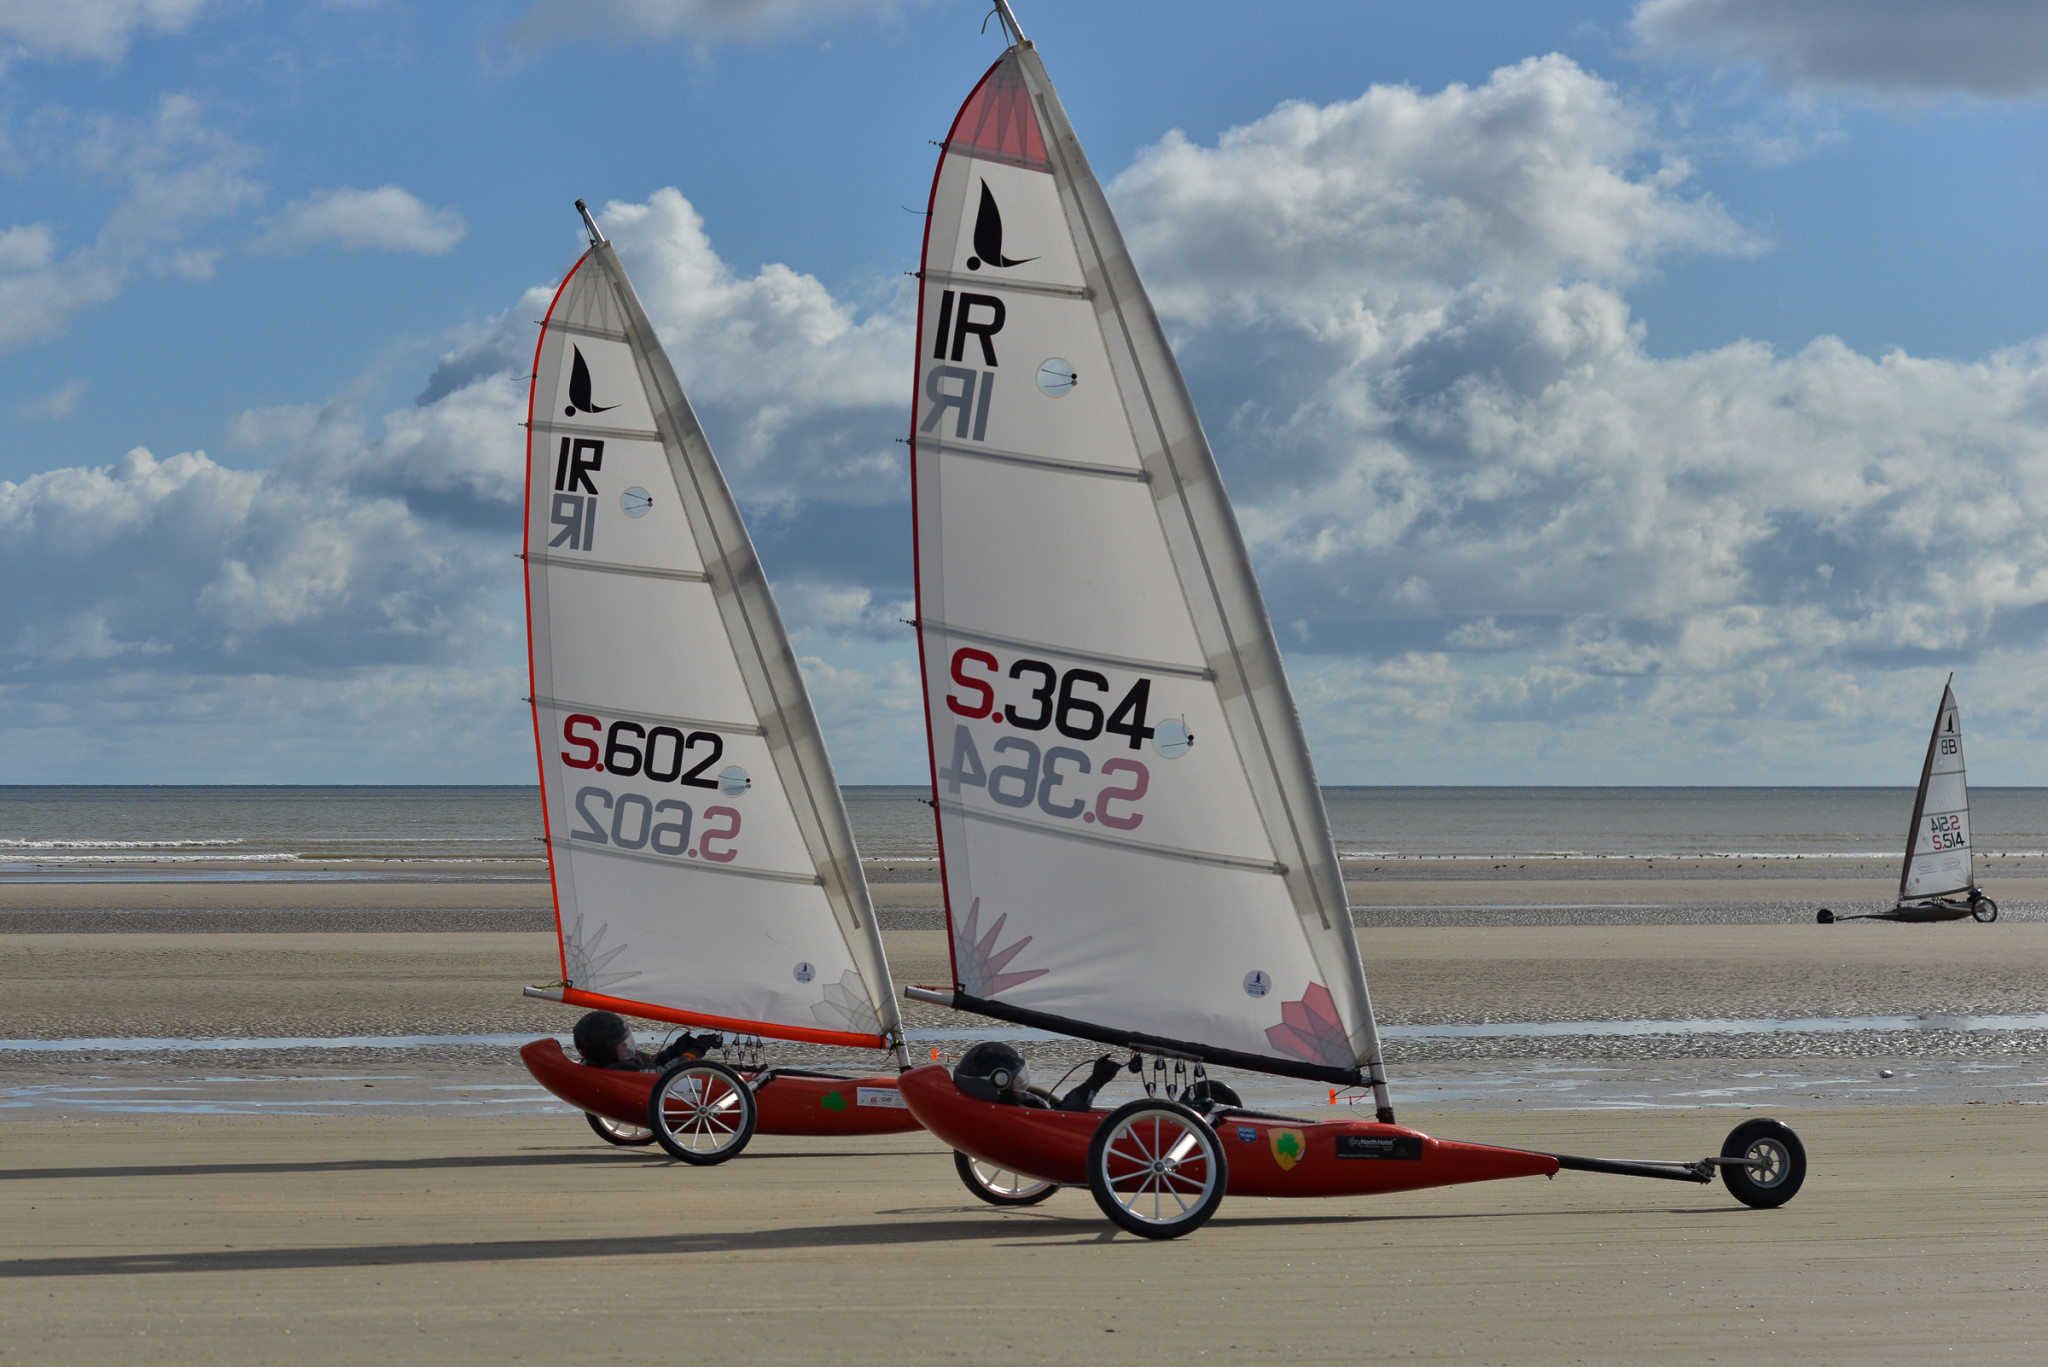 The 52nd edition of the European Landsailing Championships were held in England and Ireland last year ©GAISF